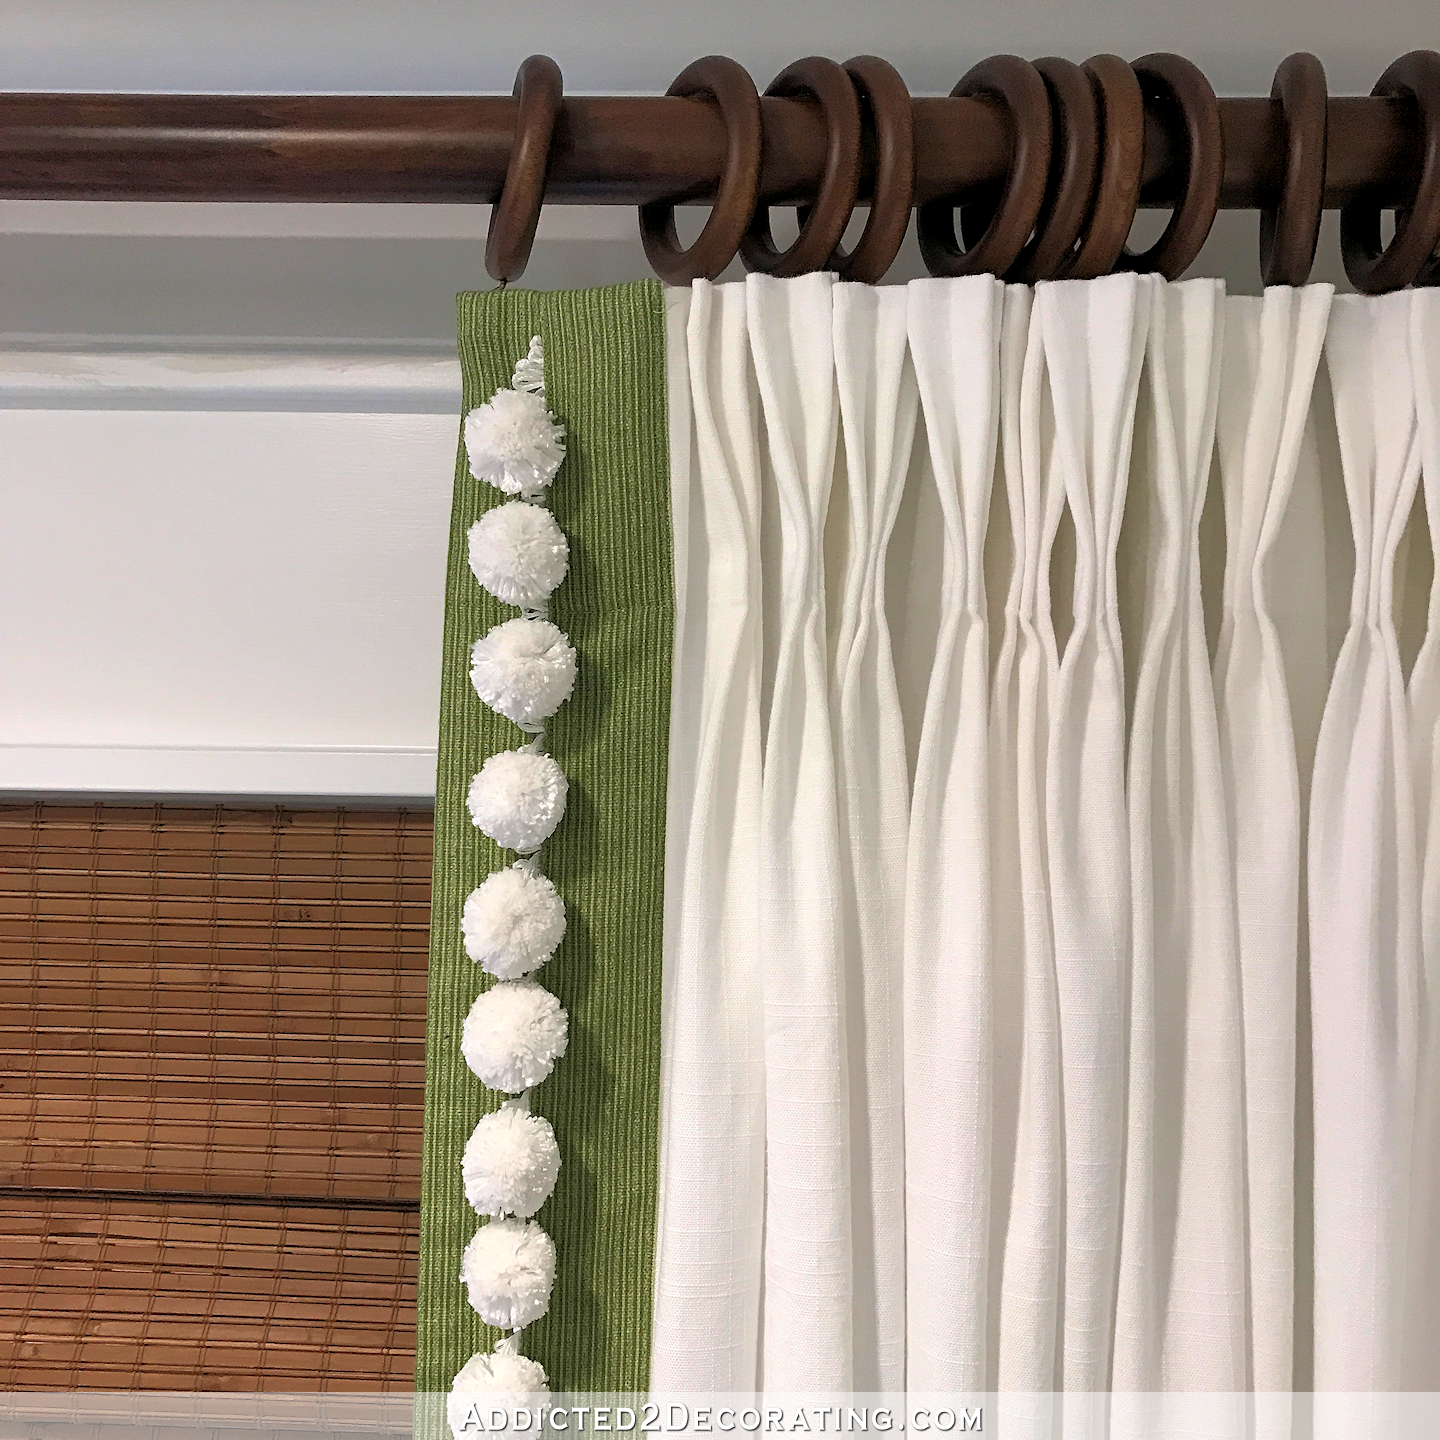 customize IKEA Ritva curtains with contras edge banding pom pom trim and pinch pleats - 26